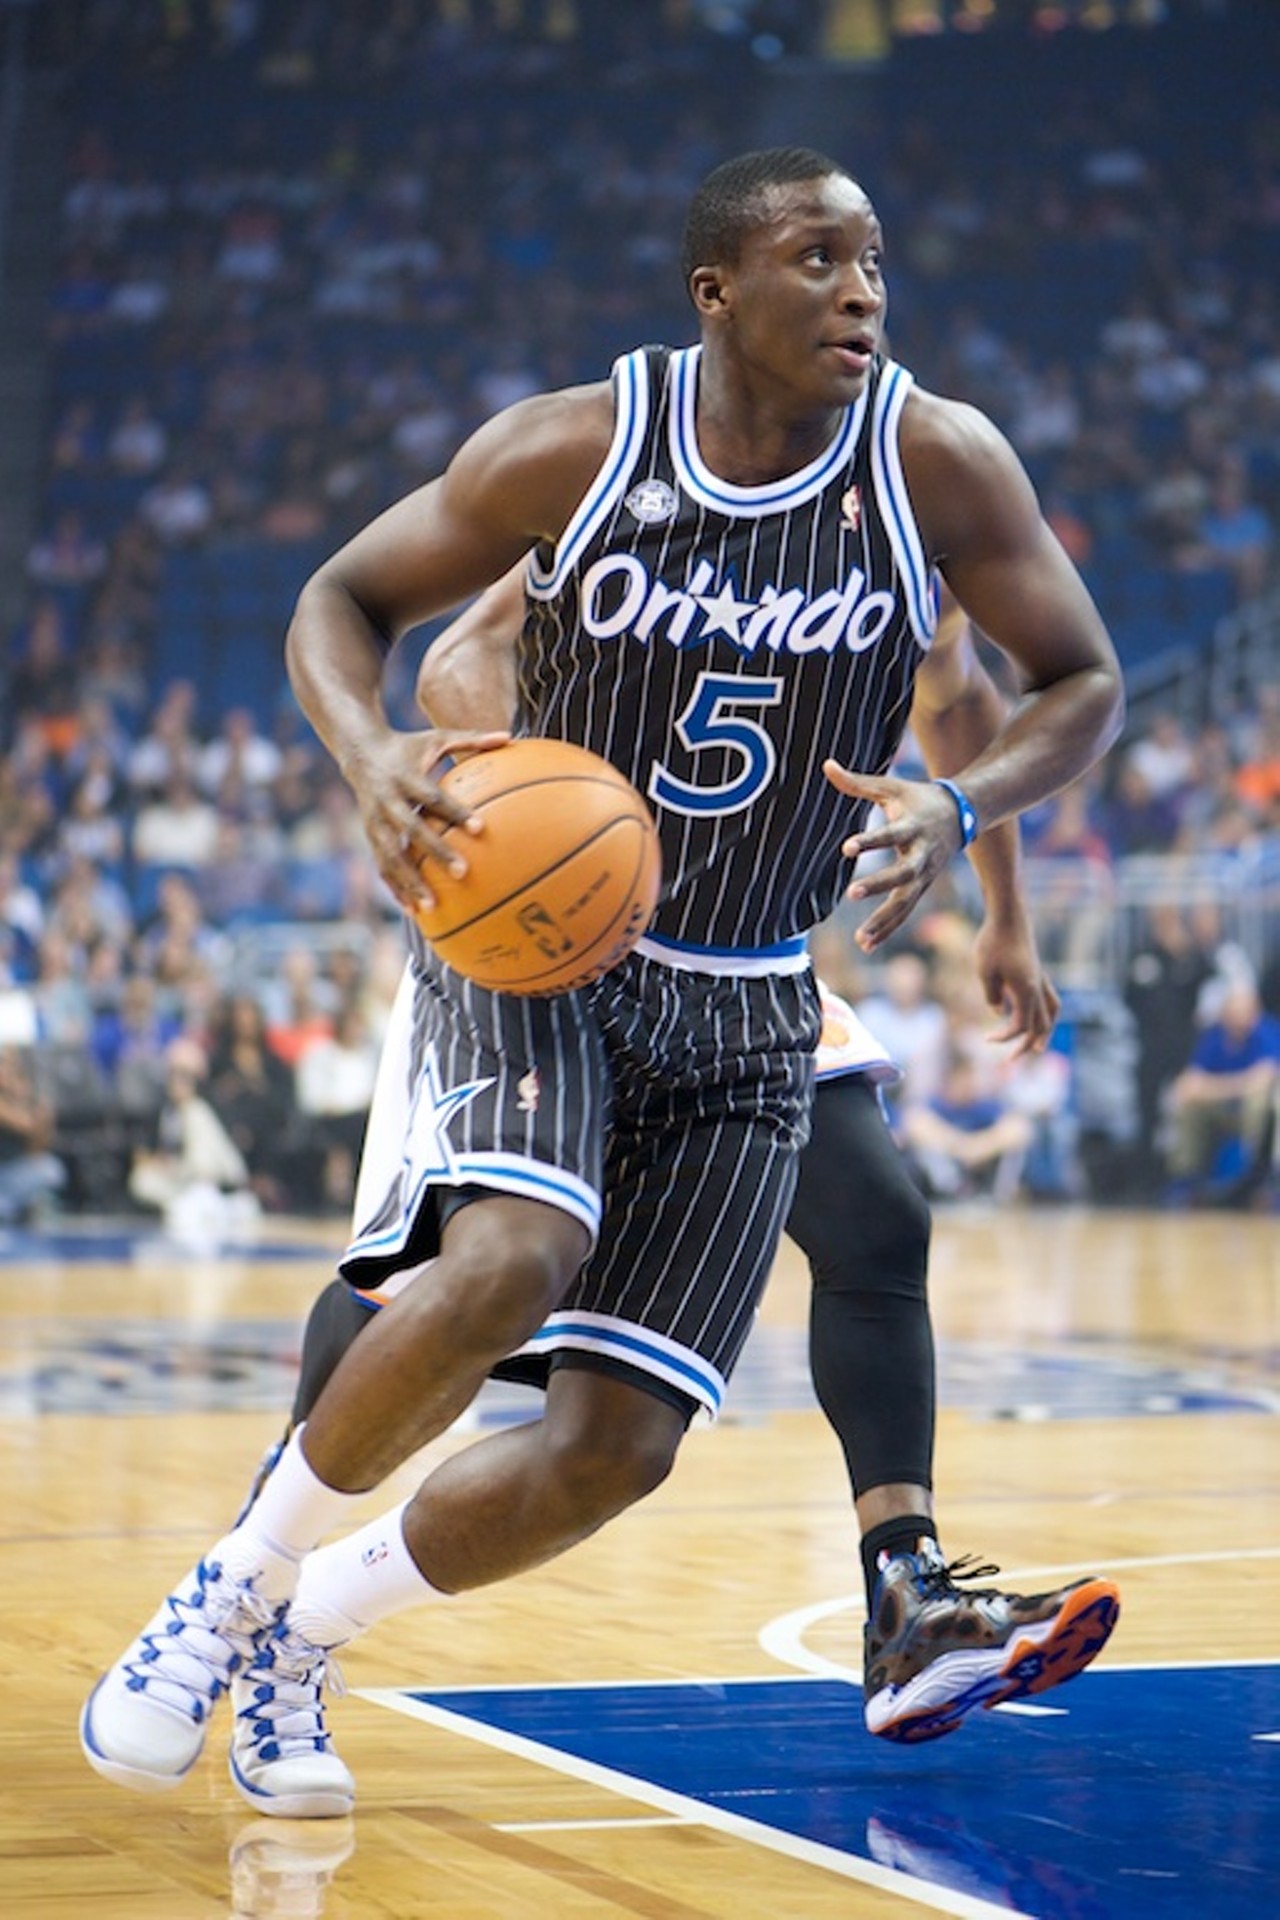 Photos from the Orlando Magic victory against the New York Knicks